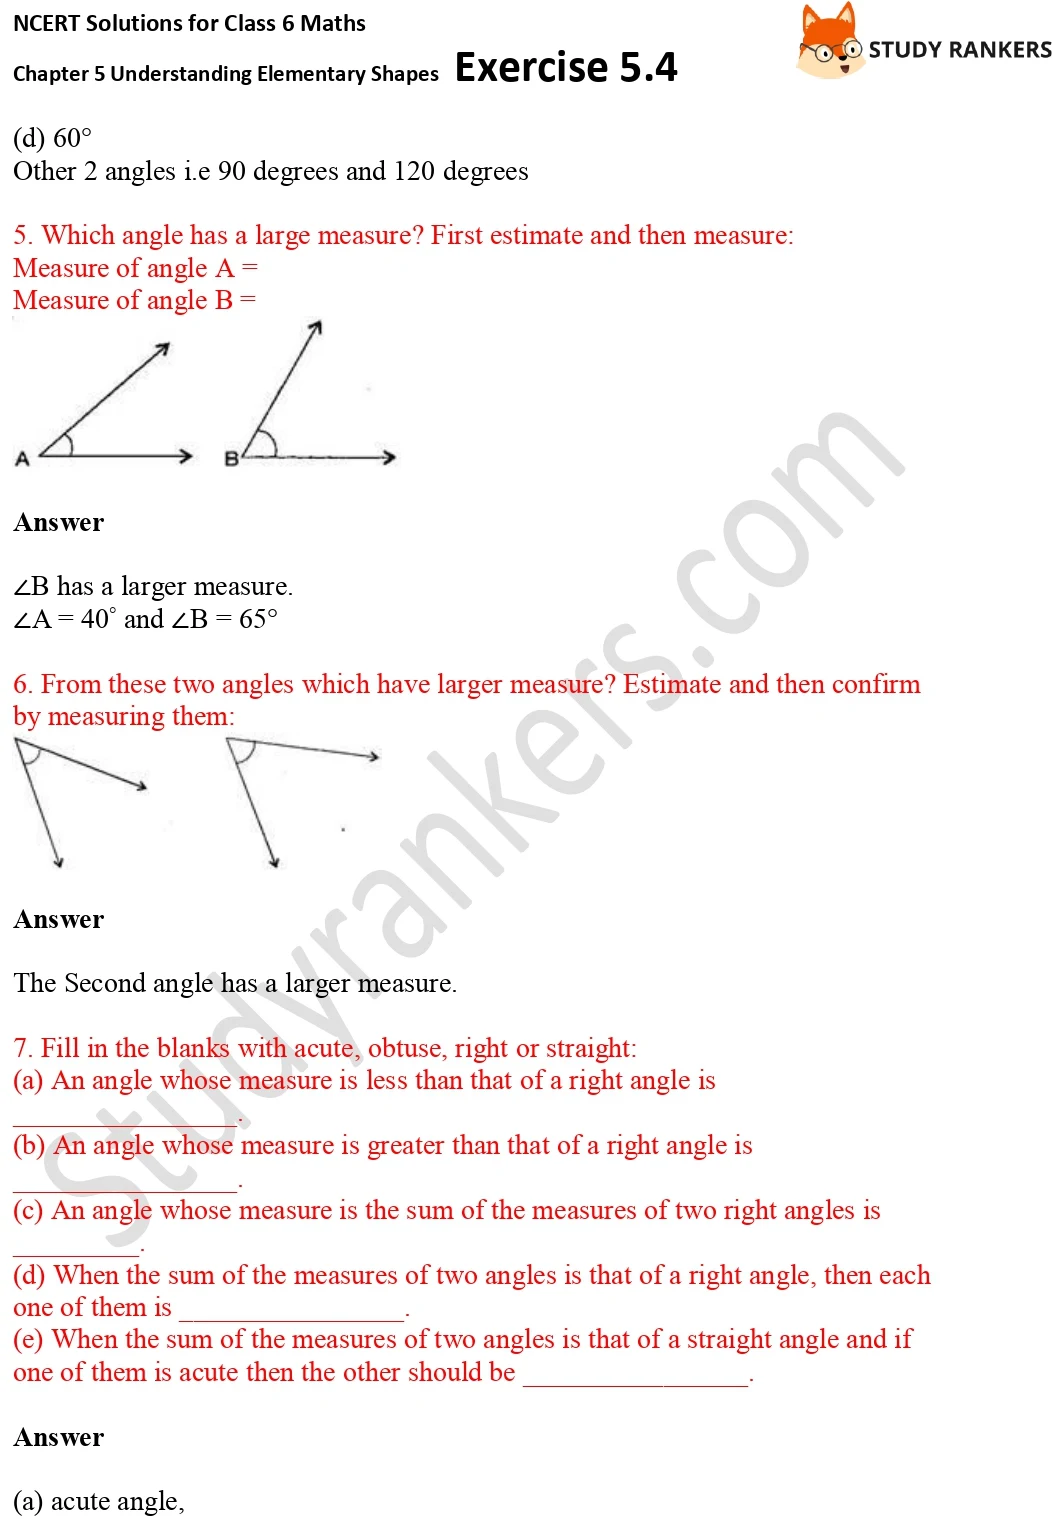 NCERT Solutions for Class 6 Maths Chapter 5 Understanding Elementary Shapes Exercise 5.4 Part 2